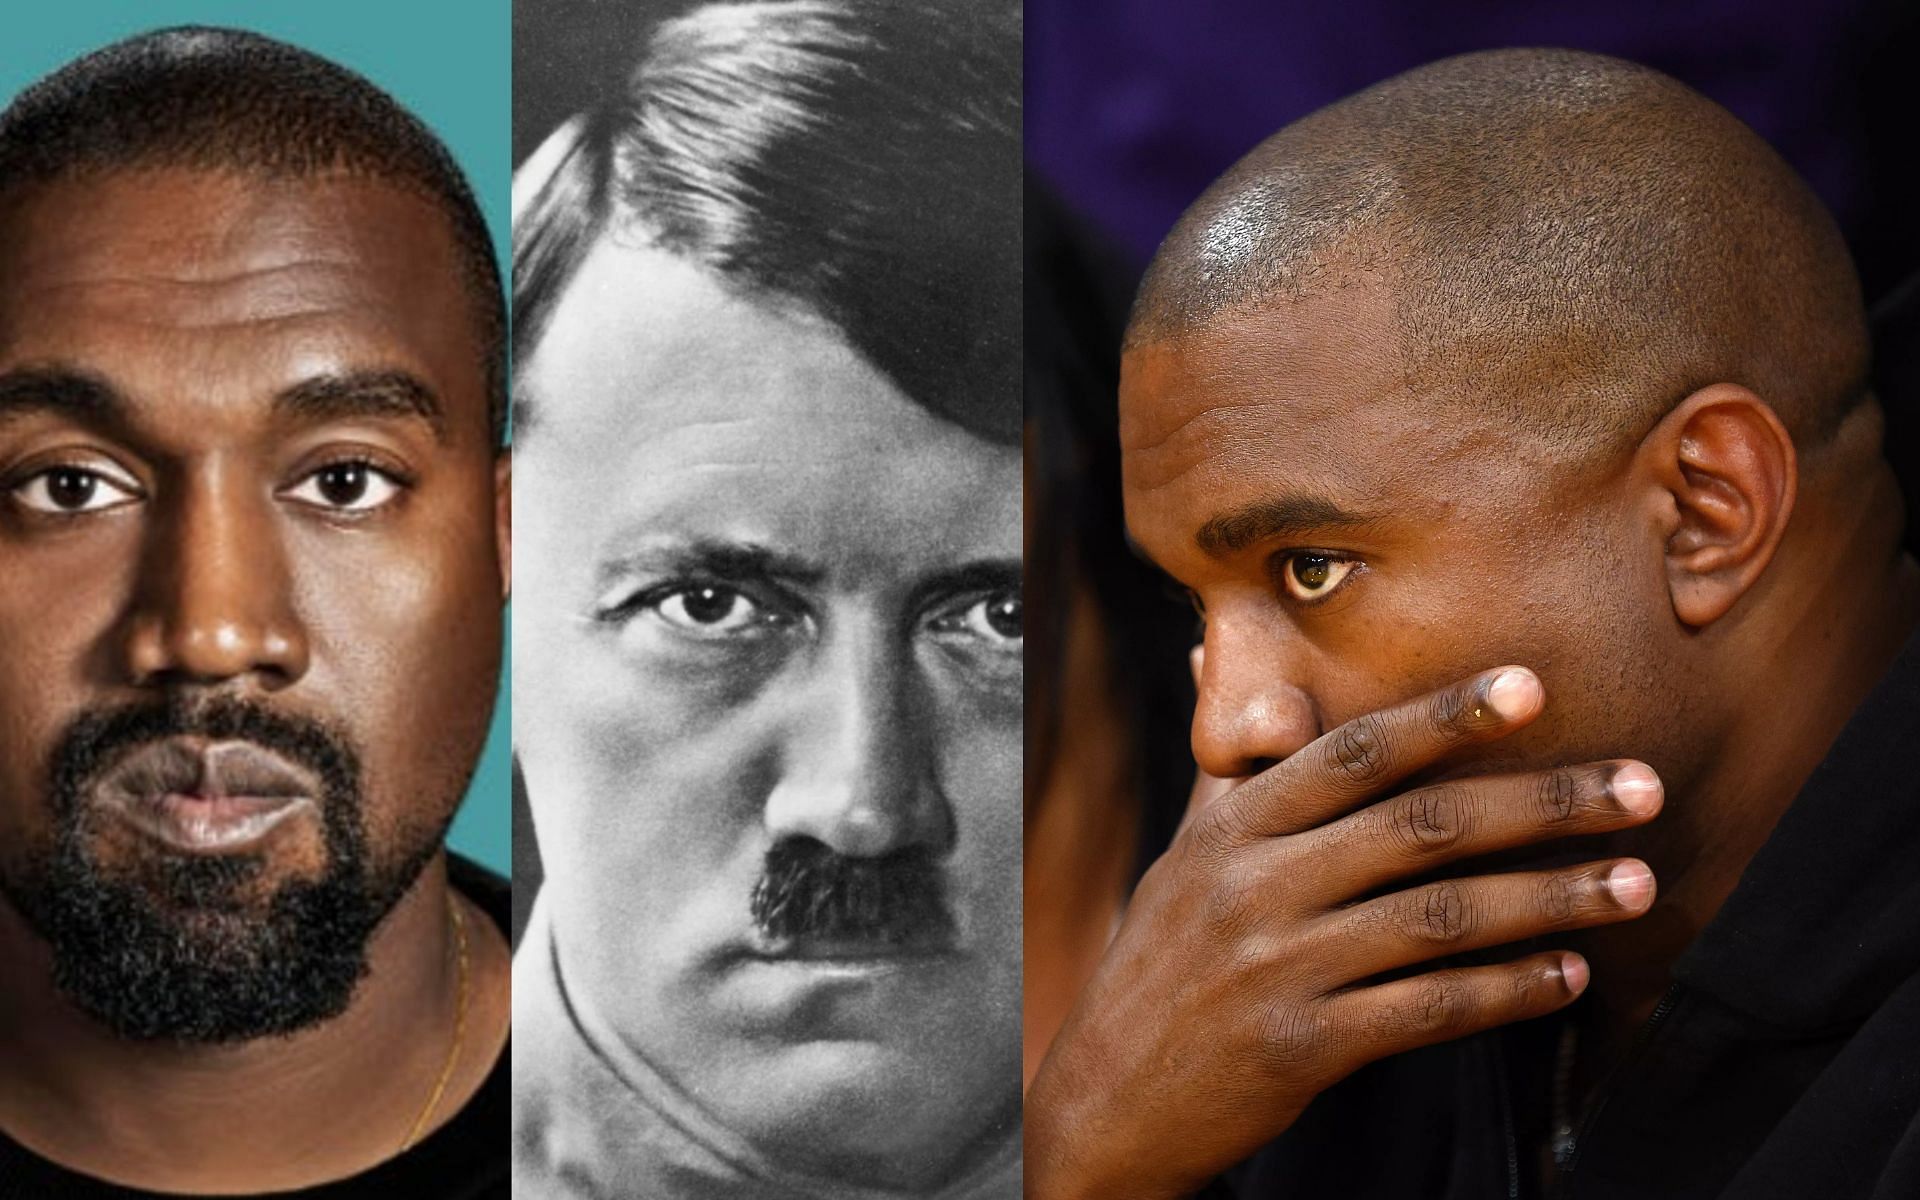 Kanye West and Hitler have now been compared by a WWE Superstar